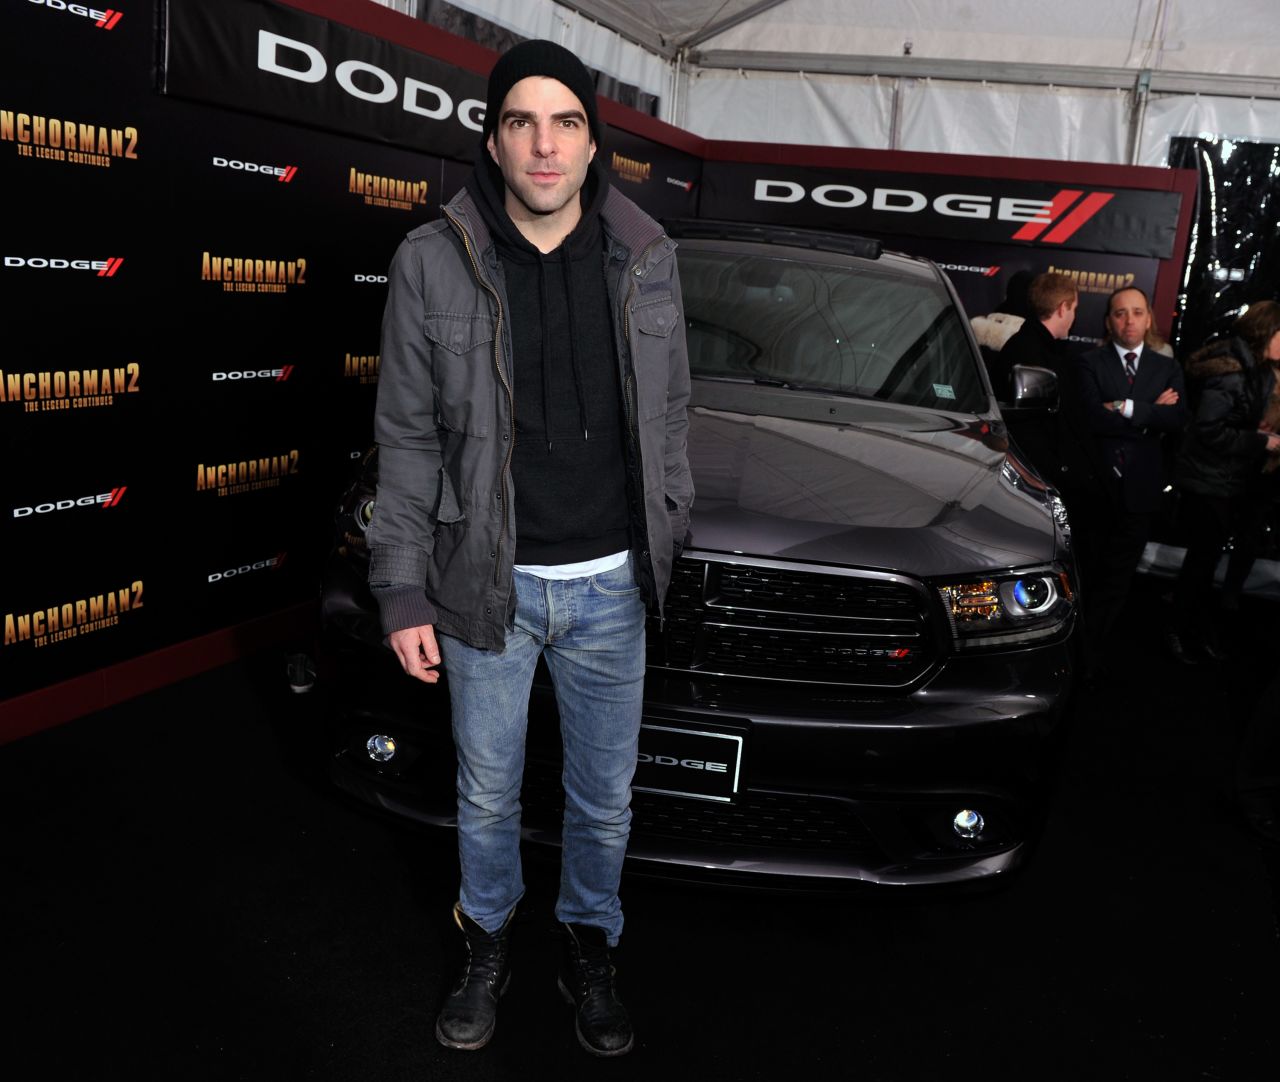  Zachary Quinto dresses down on the red carpet in New York City on December 15.